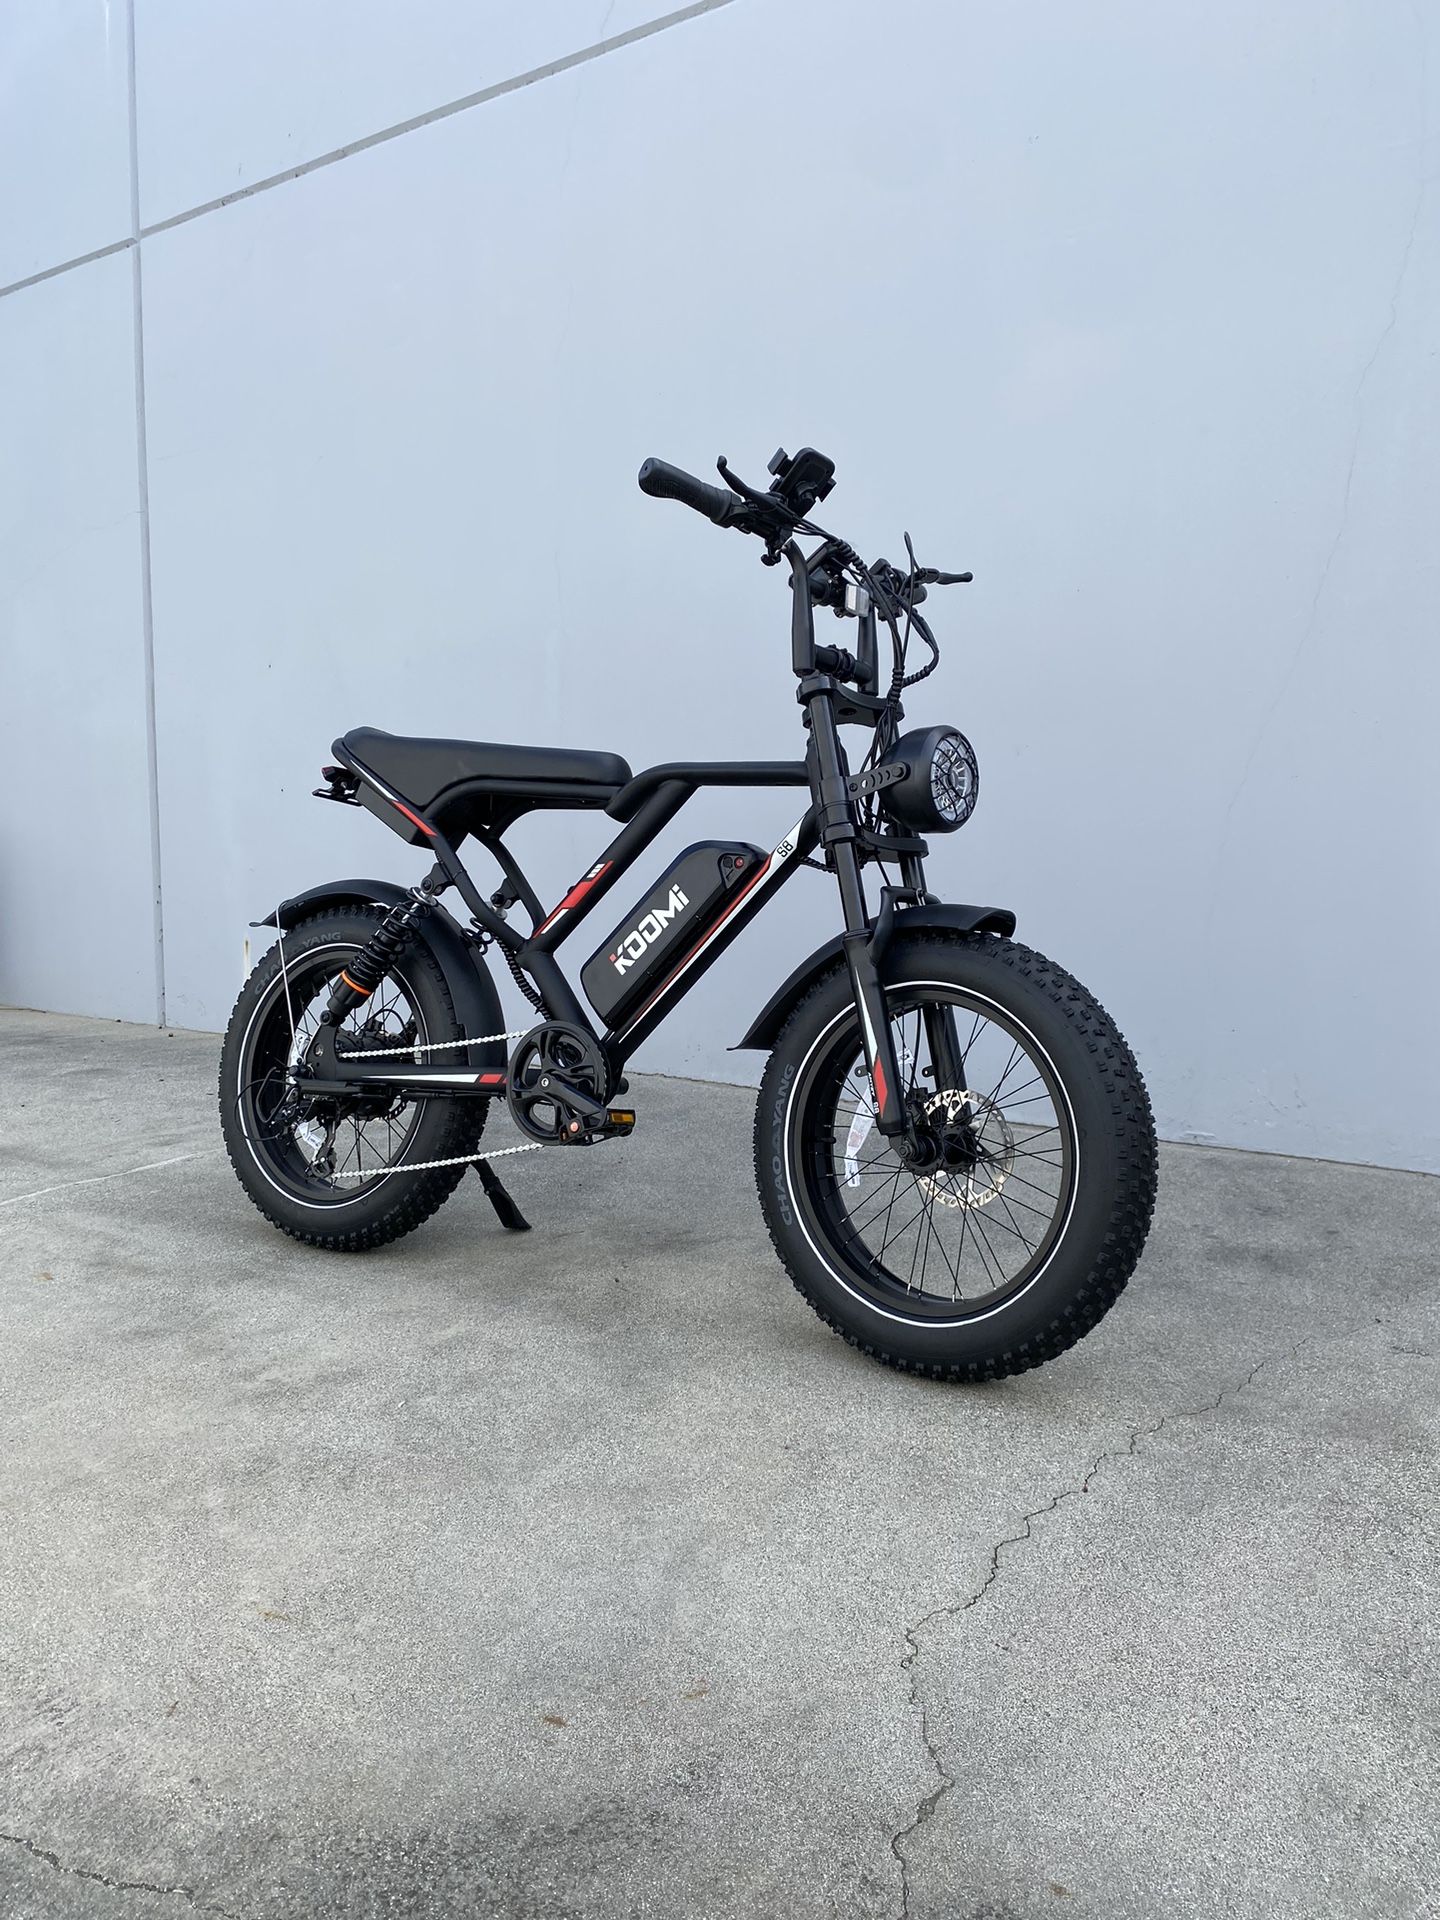 Brand new in box, e-bike 750w 48v 17.5ah, top speed 28 mph. Full suspension, with chain lock, phone holder, foot pegs,  electric bike 